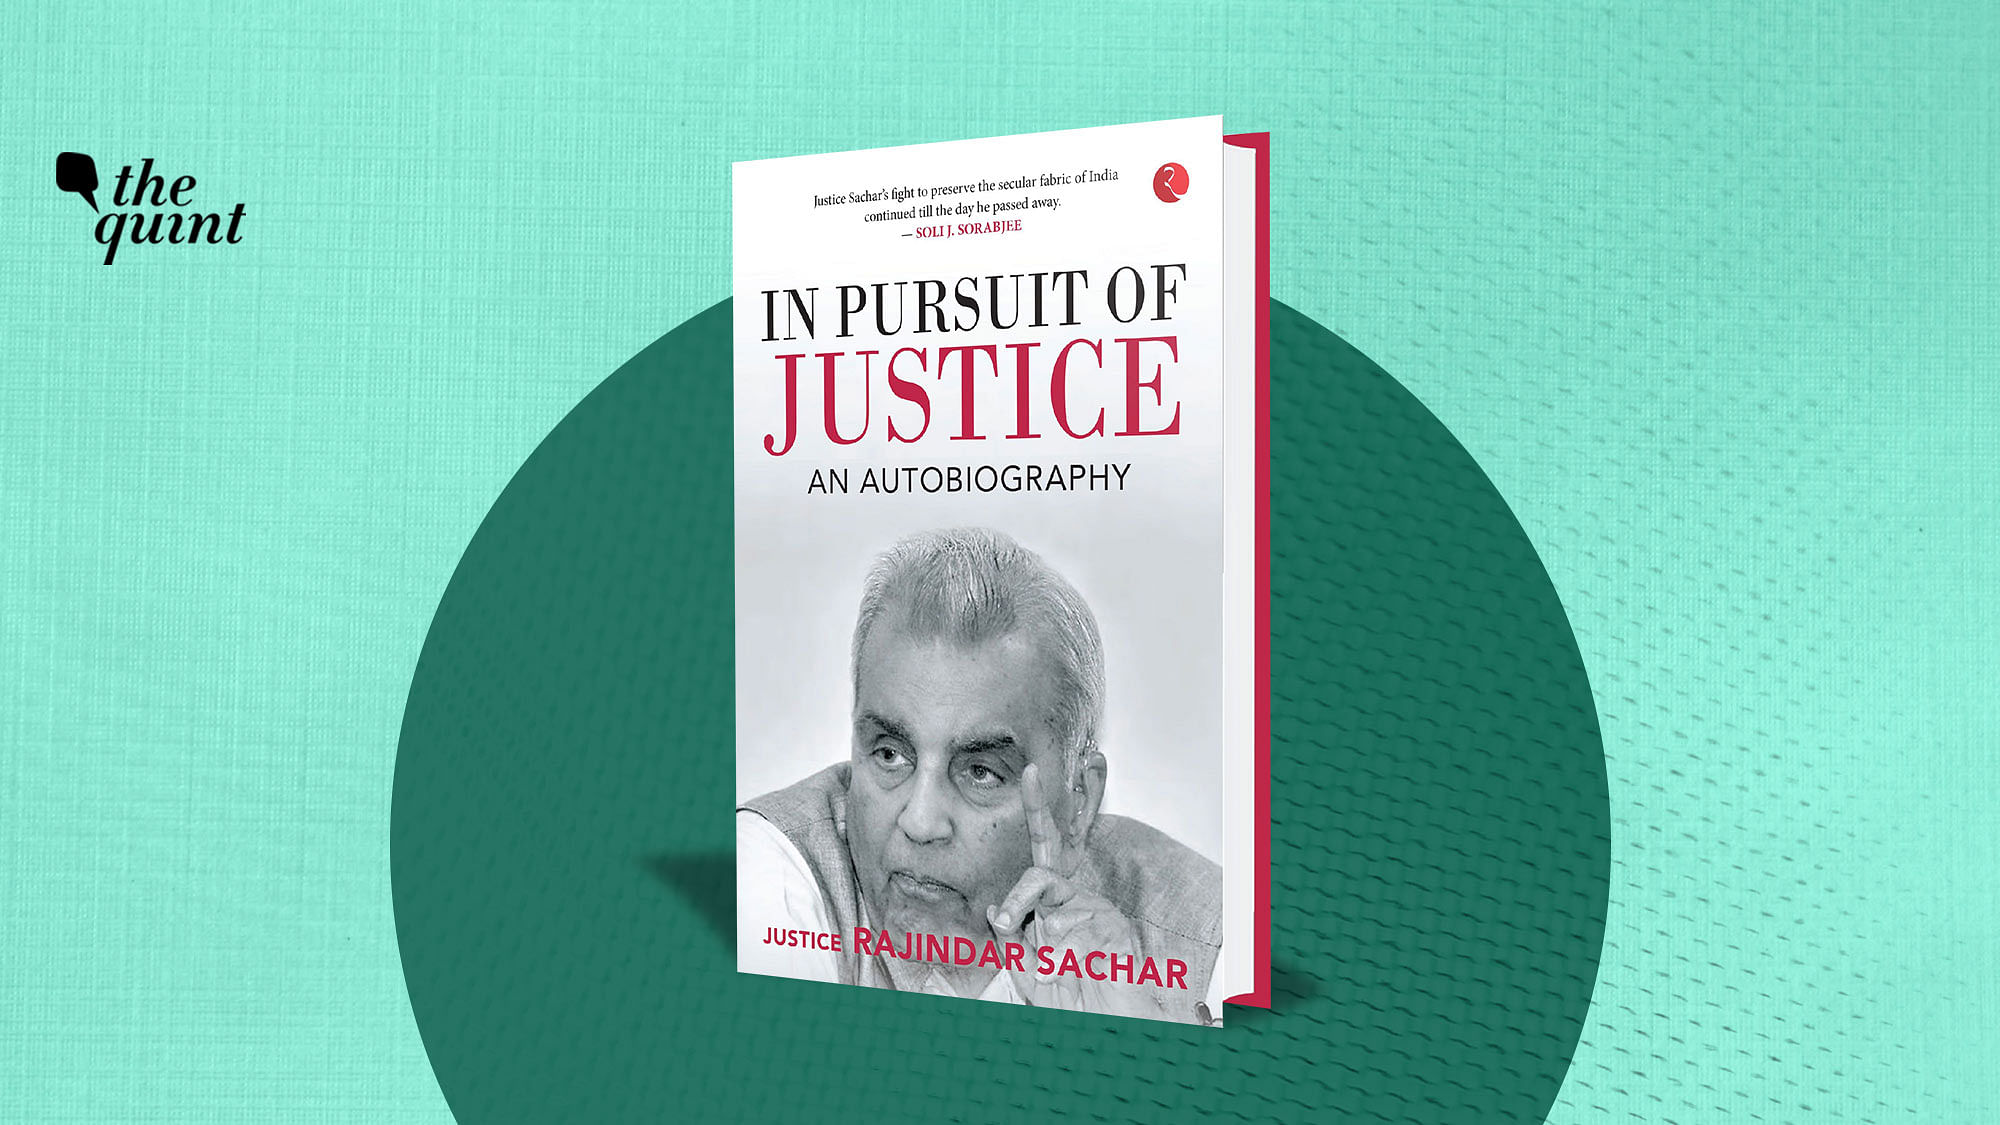 Published posthumously by Rupa Publications and bearing a Foreword by Indian Jurist Soli Sorabjee, Justice Sachar’s autobiography “In Pursuit of Justice” stems from his handwritten notes and some recorded interviews.